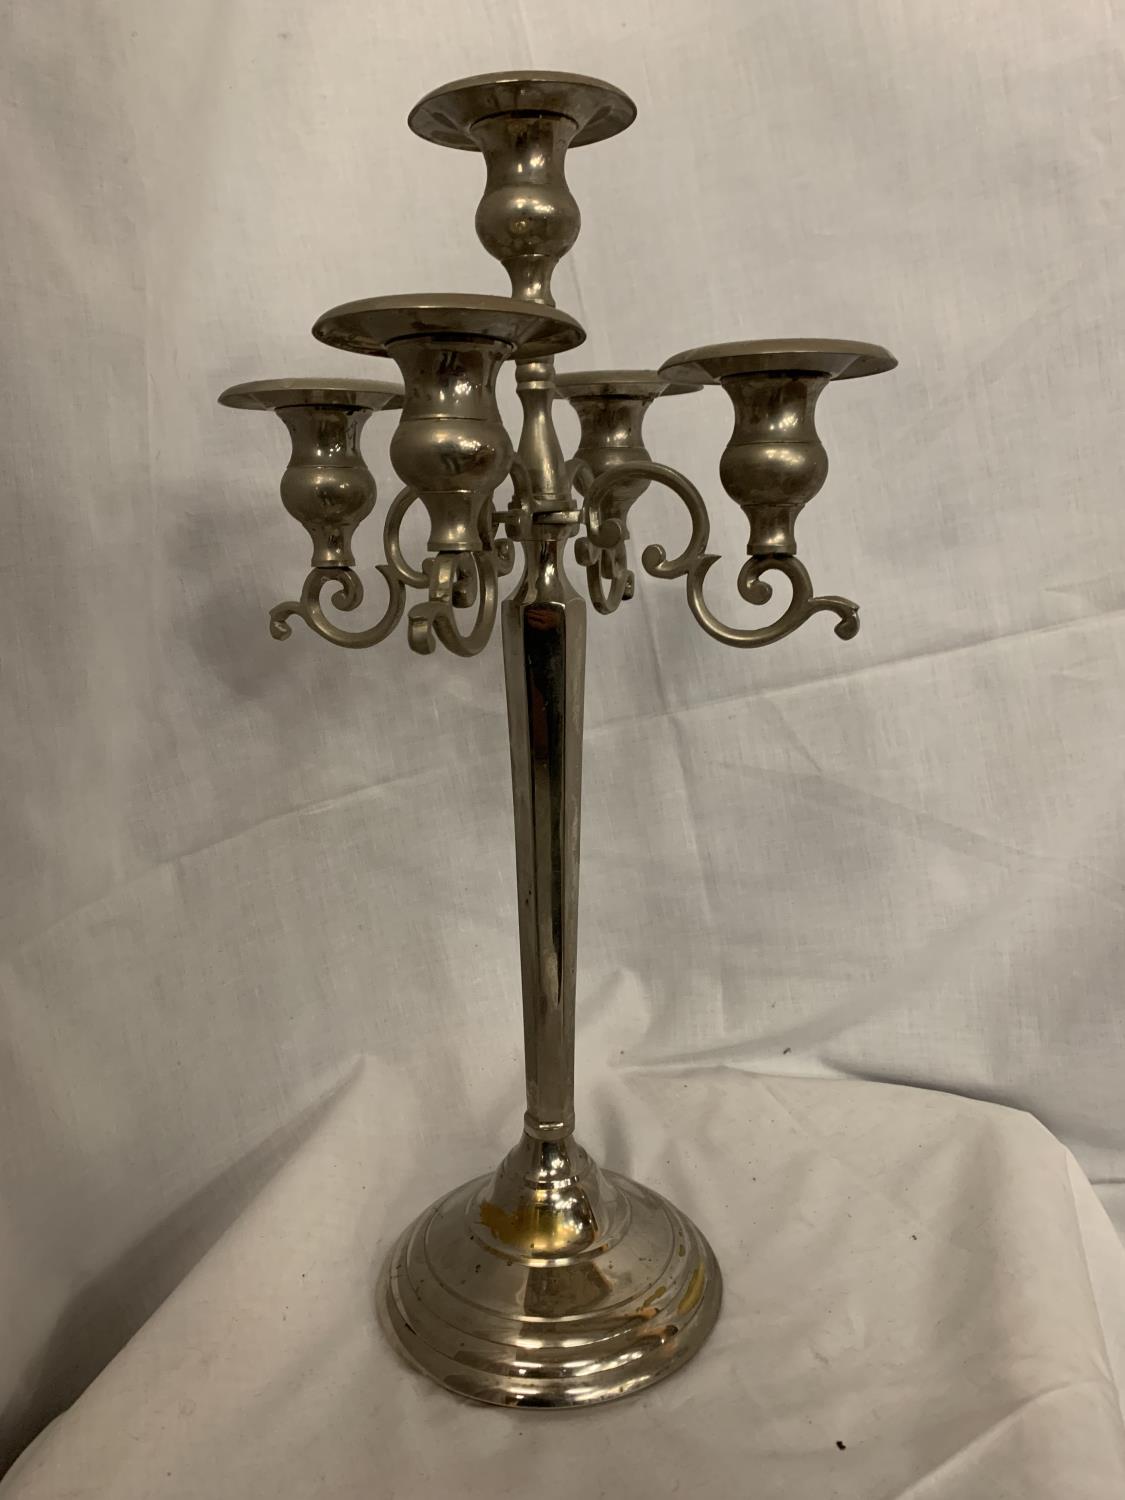 A TALL ORNATE CHROME FIVE BRANCH CANDLEABRA - Image 3 of 3